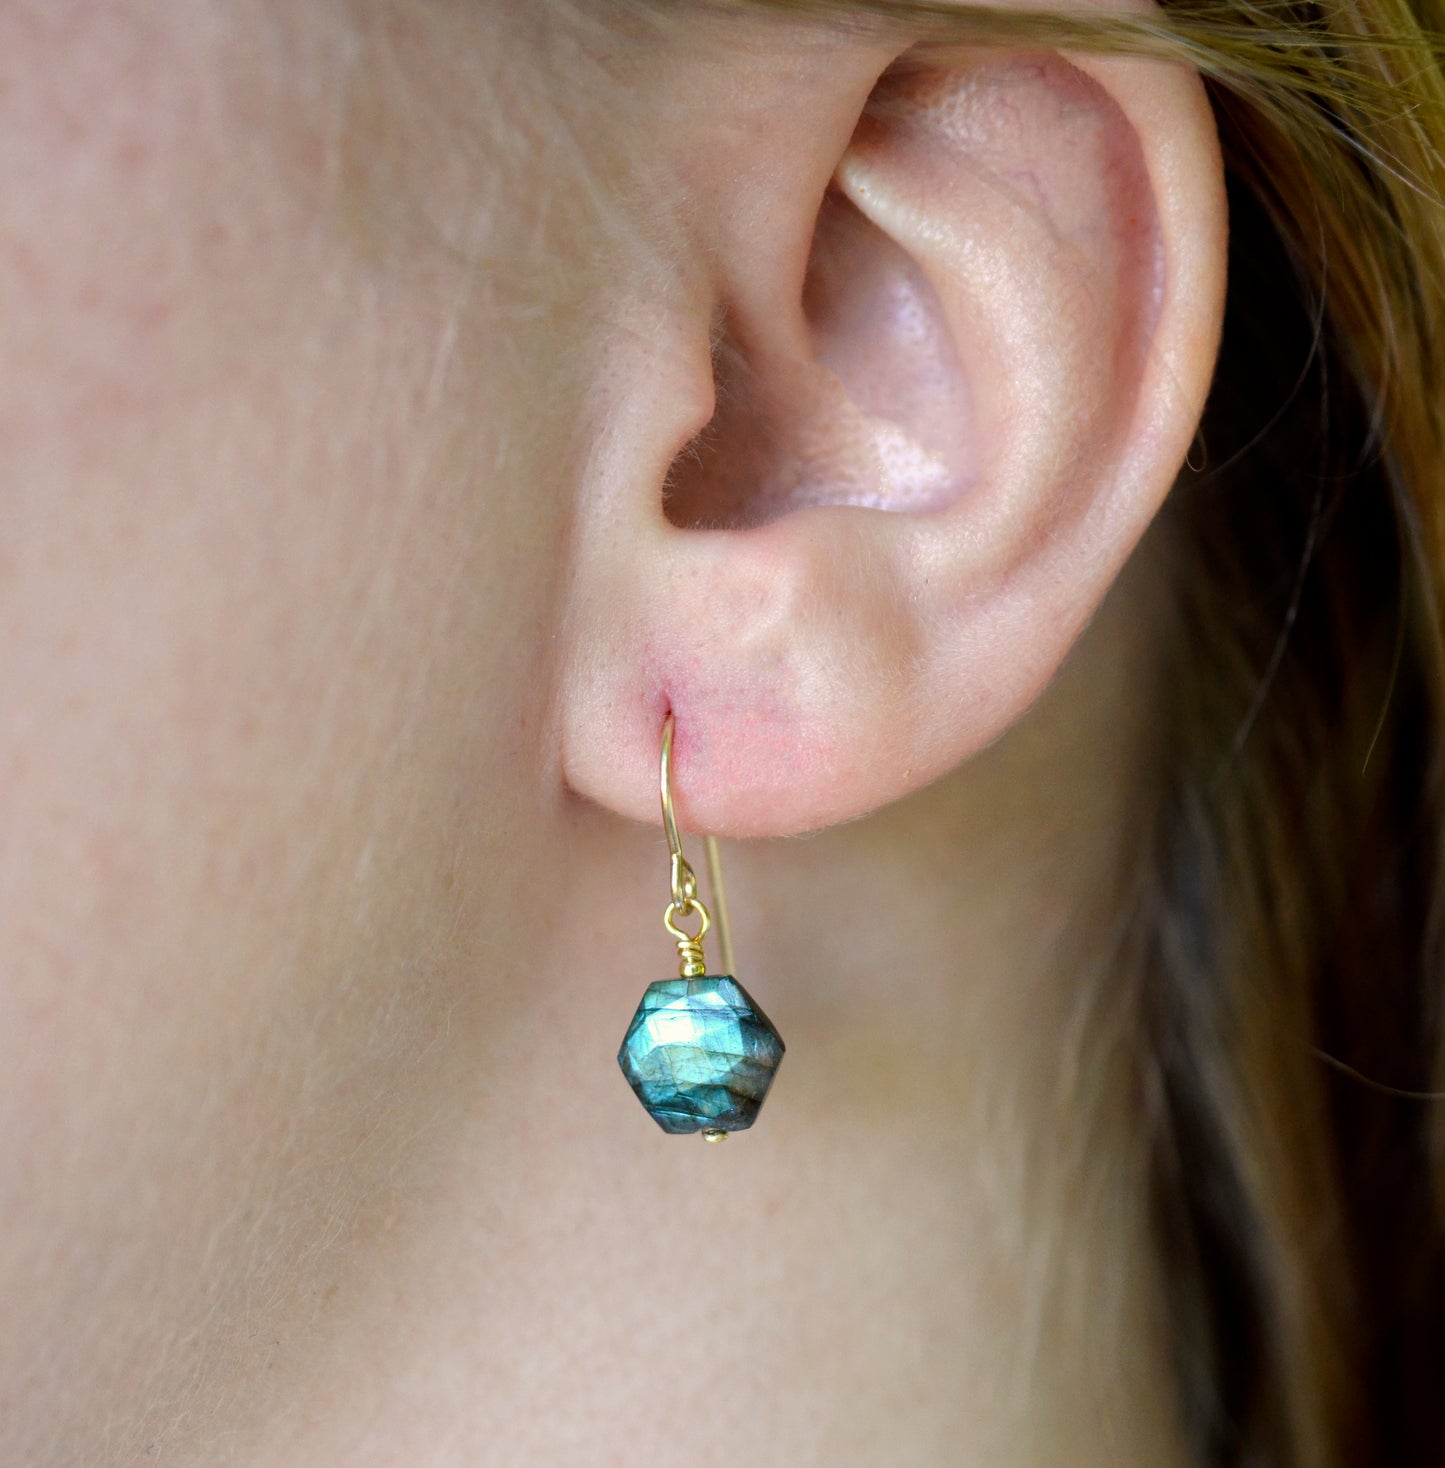 Blue flashing Labradorite gemstones in a faceted hexagonal shape dangle from 14k gold filled earring hooks. Small gold beads accent below the stone. Also available in sterling silver. Modeled image.